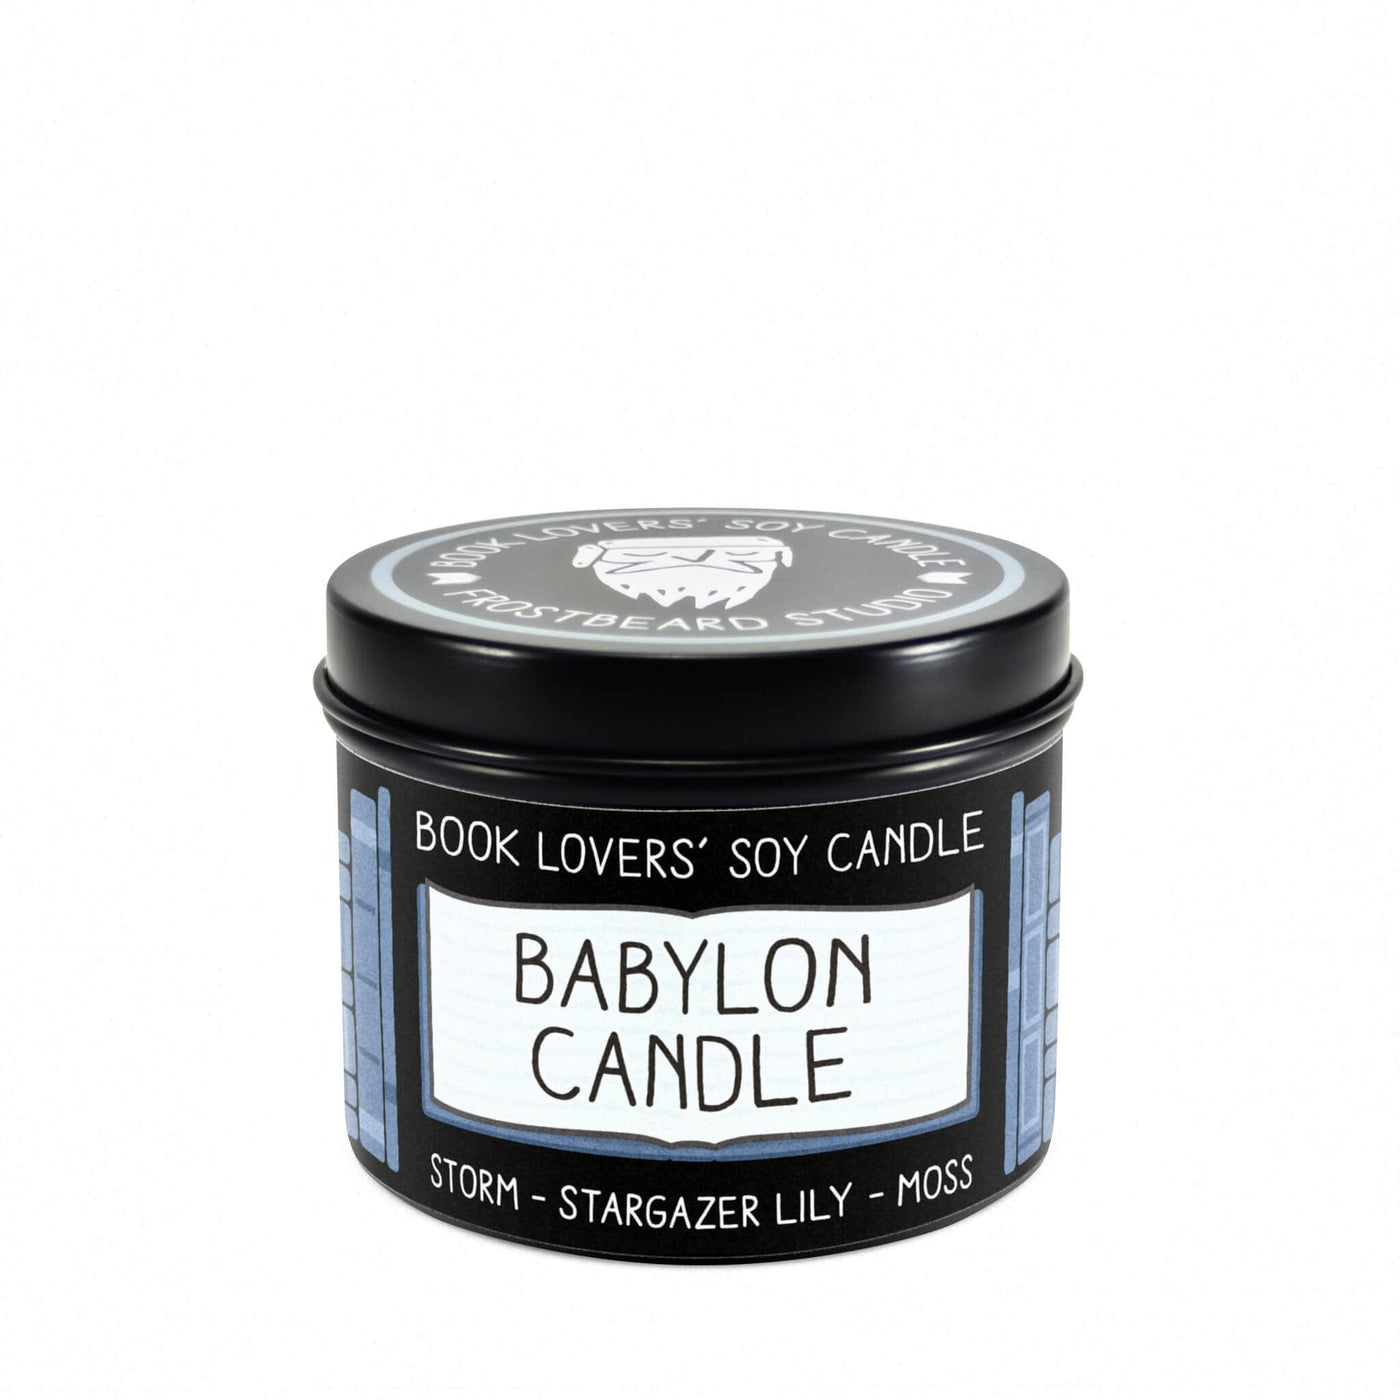 Babylon Candle  -  4 oz Tin  -  Book Lovers' Soy Candle  -  Frostbeard Studio